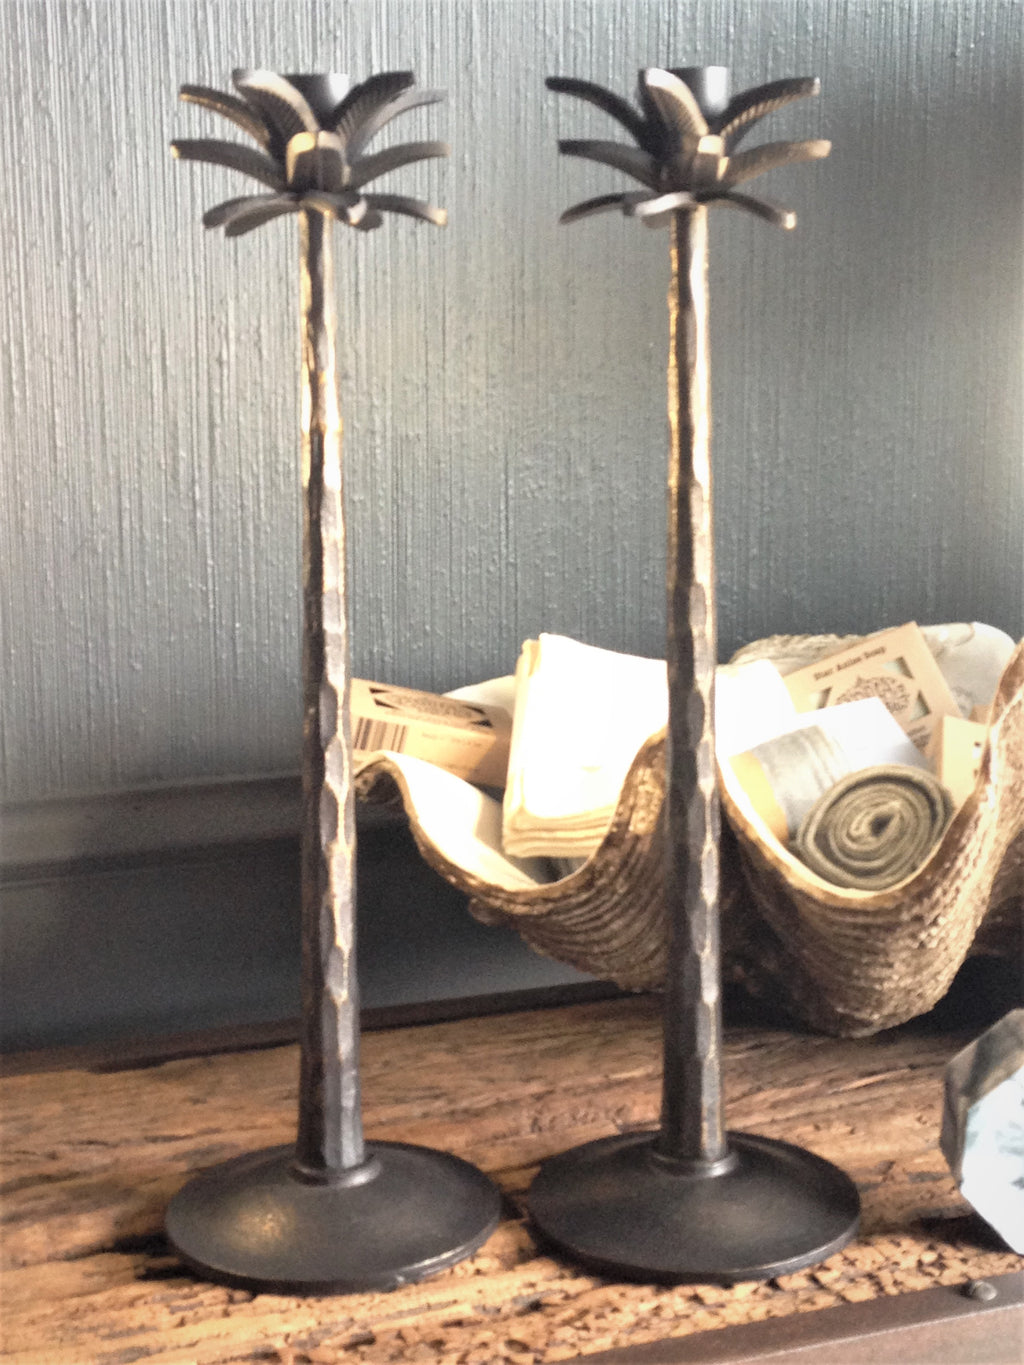 Two upright candlesticks with palm leaf design at the top.